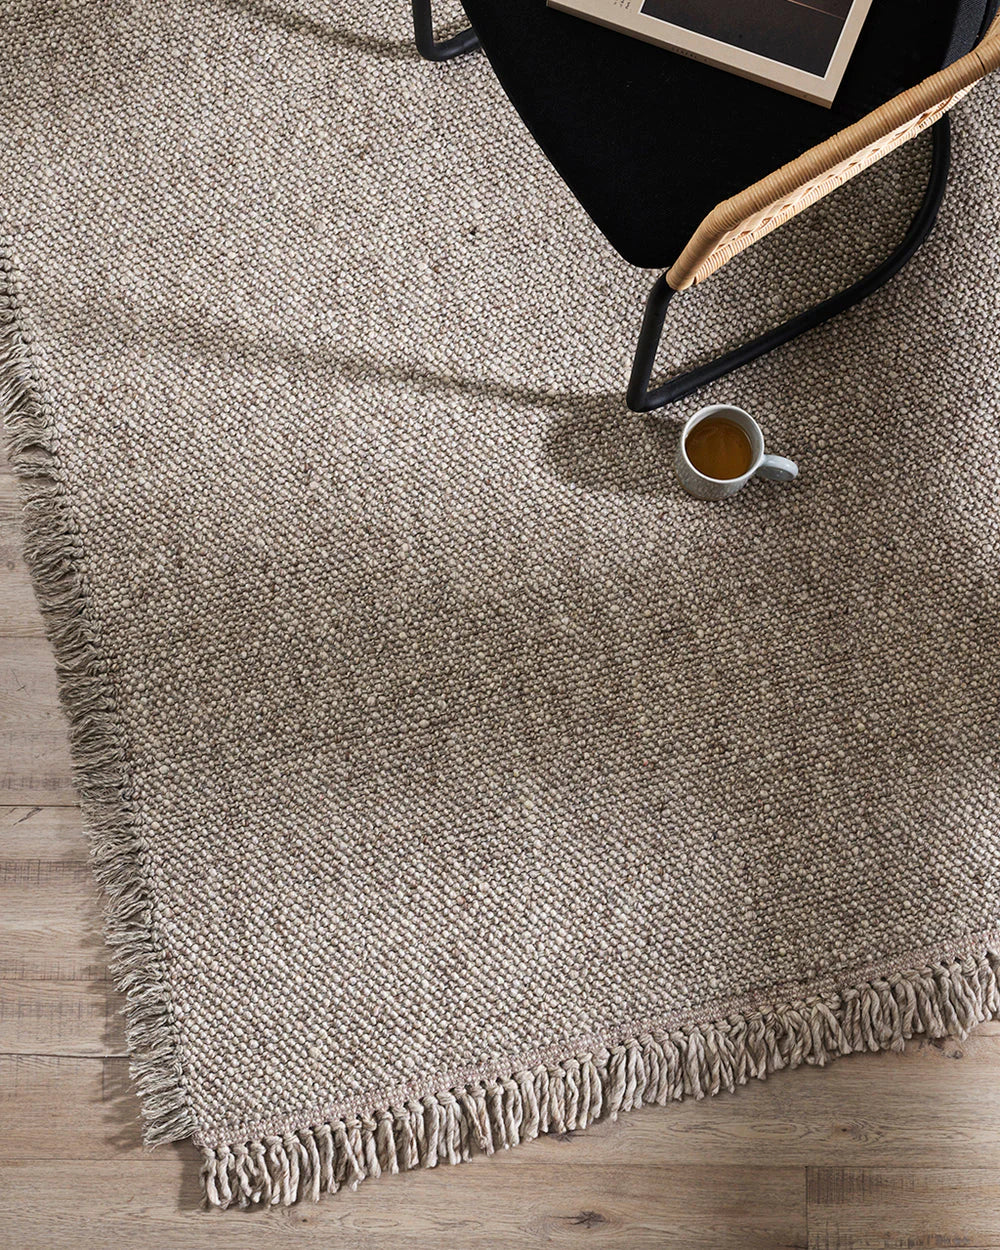 Ulster Taupe Natural Rug from Baya Furtex Stockist Make Your House A Home, Furniture Store Bendigo. Free Australia Wide Delivery. Mulberi Rugs.